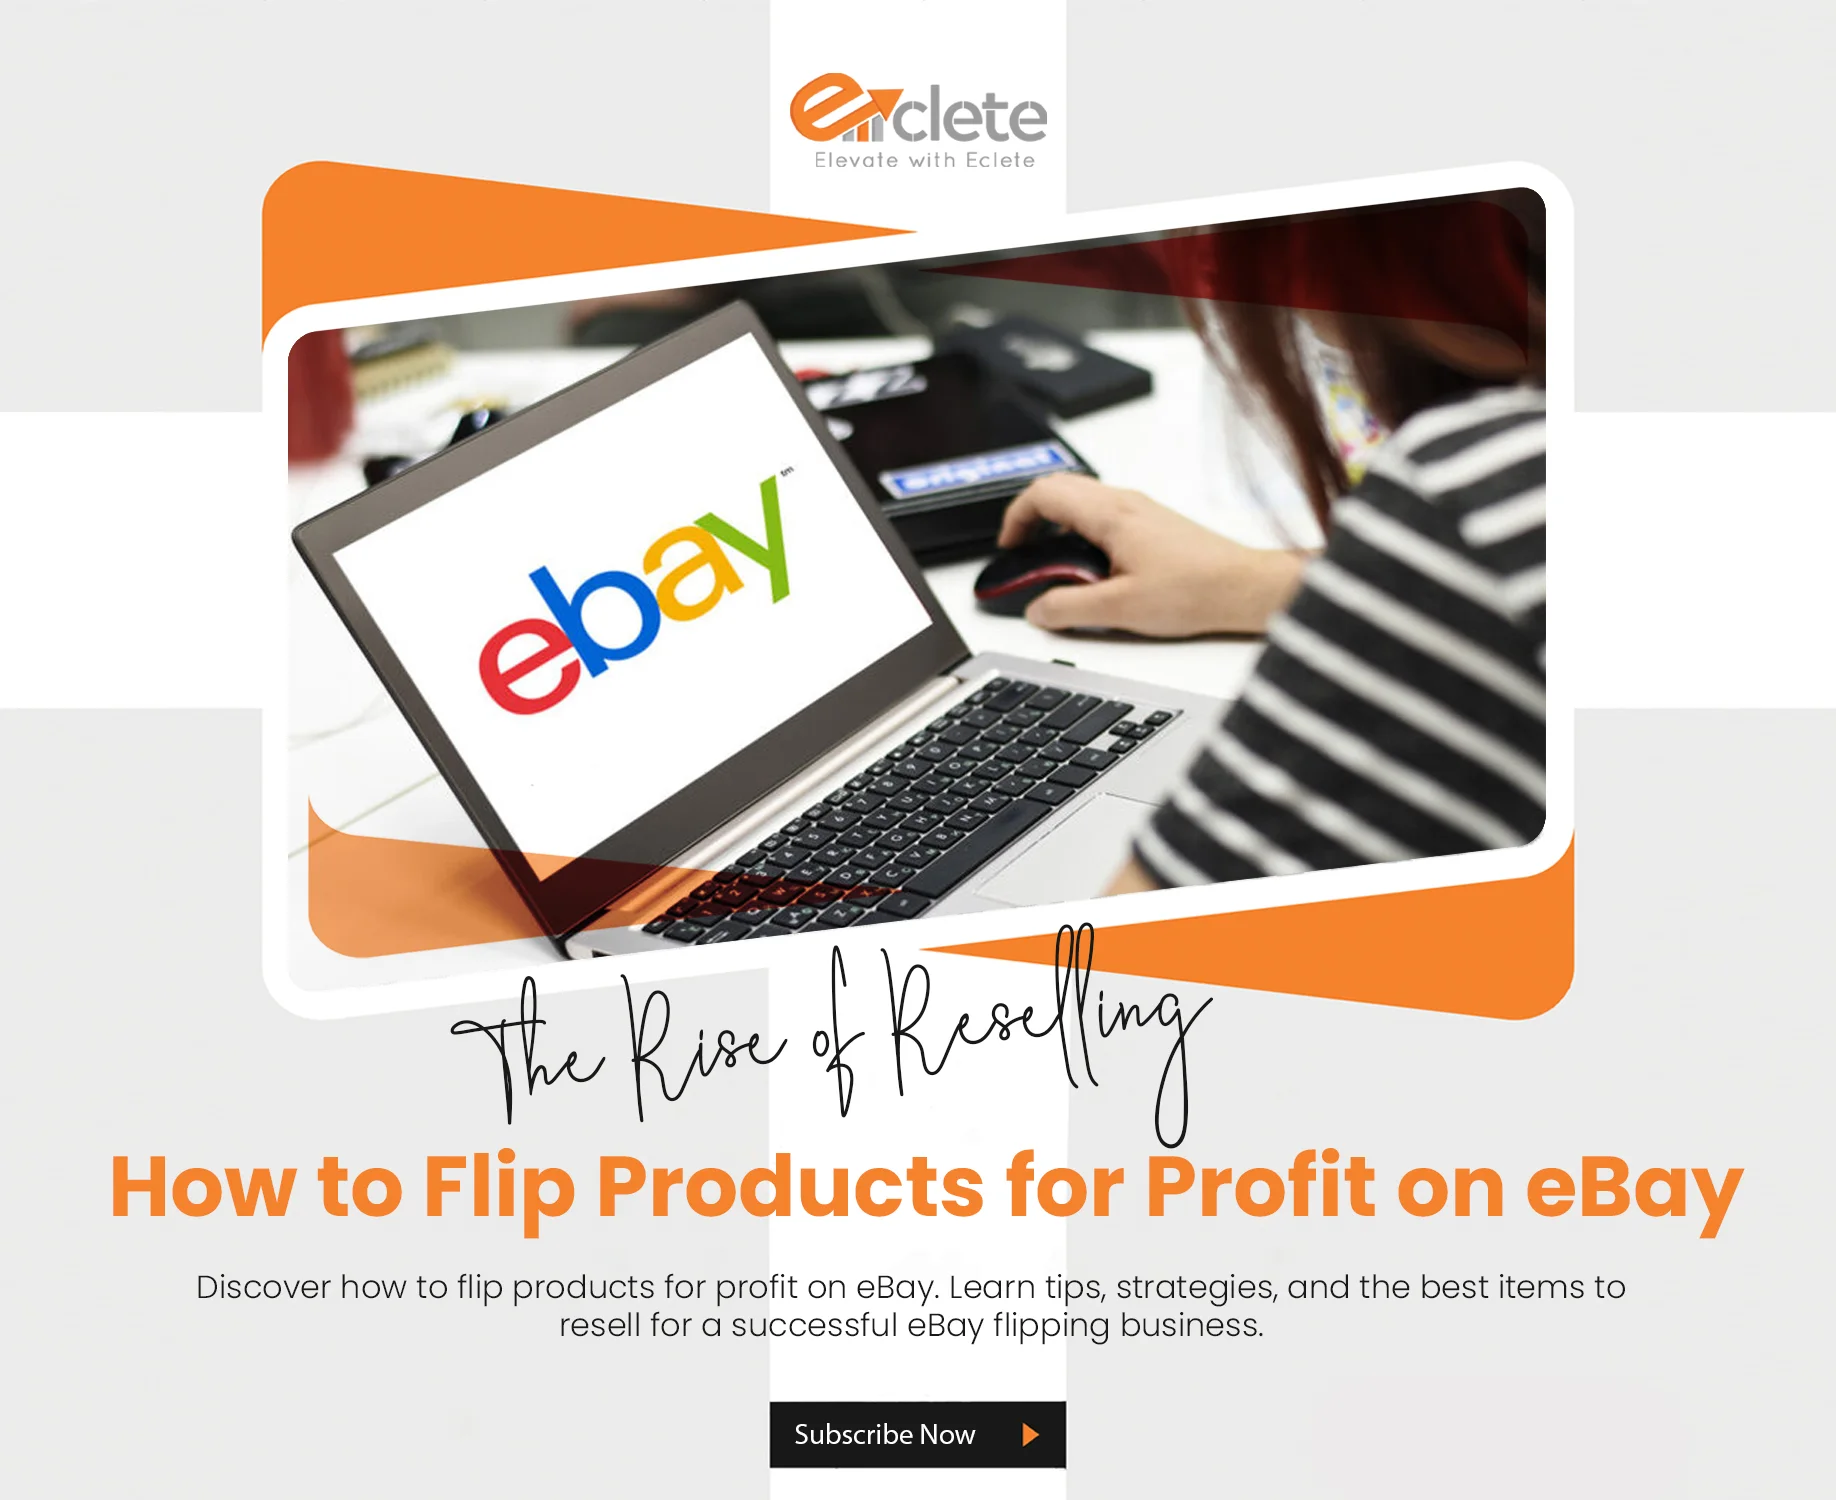 How to Flip Products for Profit on eBay